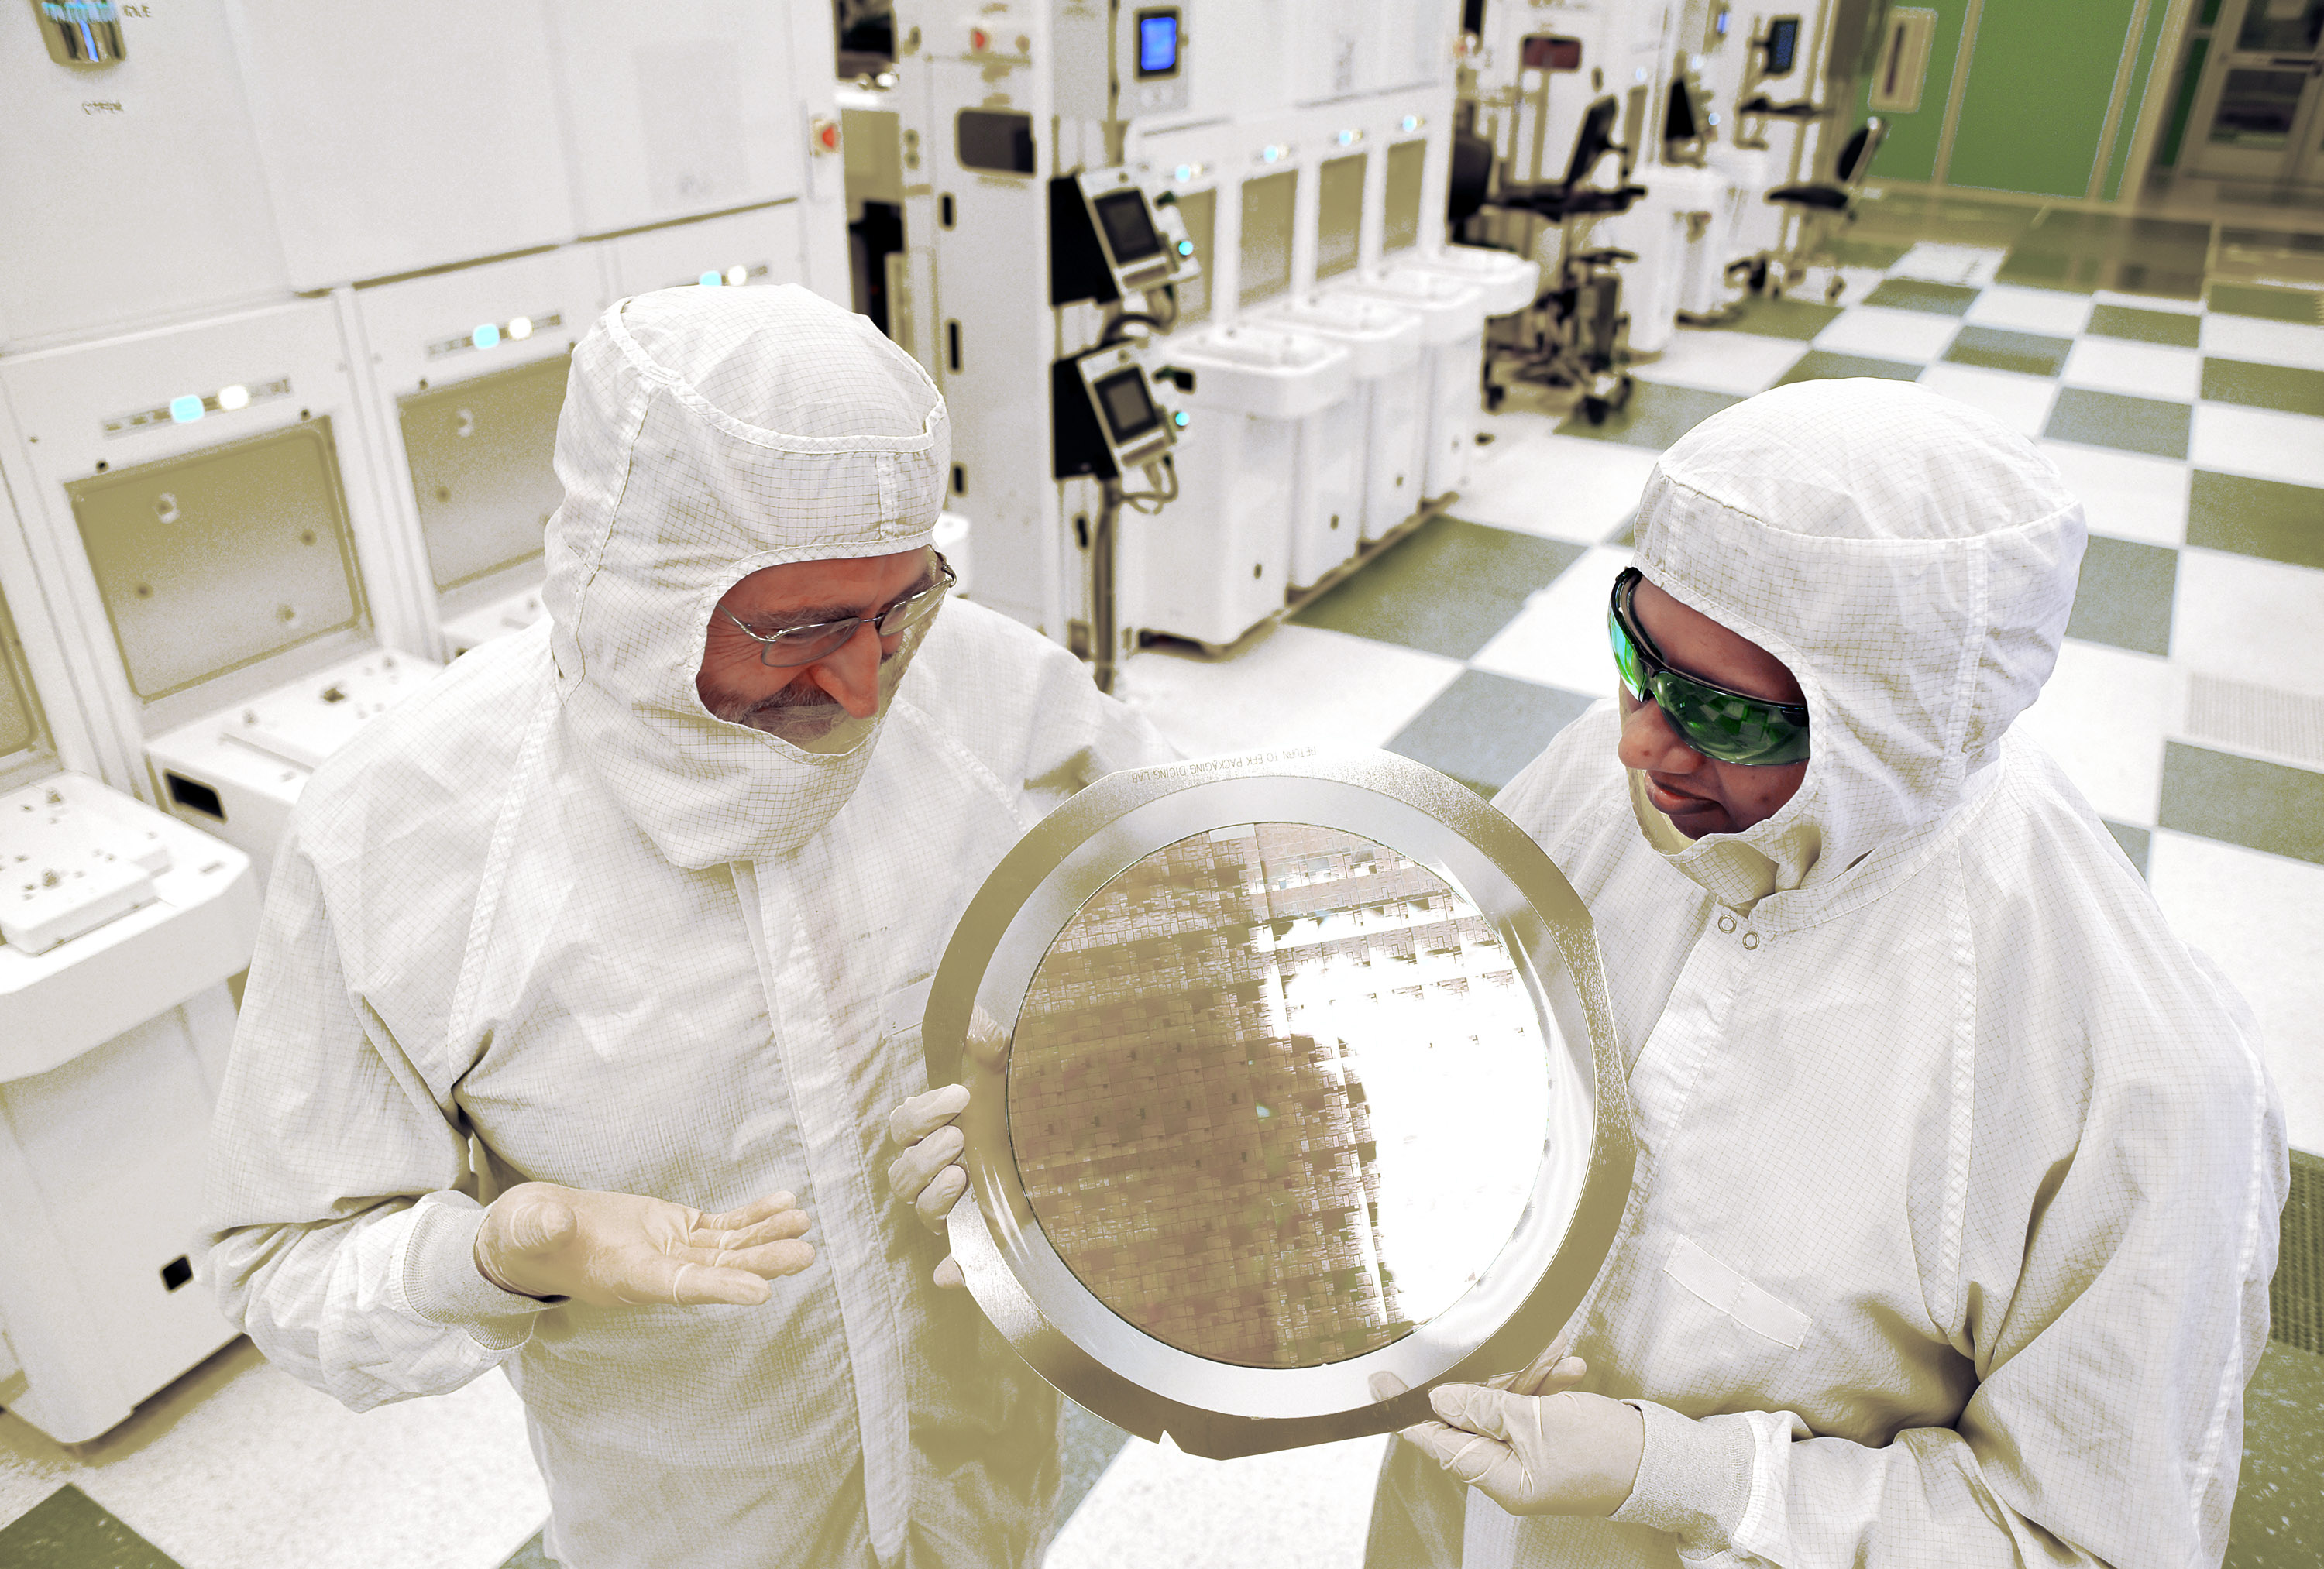 SUNY College of Nanoscale Science and Engineering's Michael Liehr, left, and IBM's Bala Haranand look at wafer comprised of 7nm chips on Thursday, July 2, 2015, in a NFX clean room Albany. Several 7nm chips at SUNY Poly CNSE on Thursday in Albany. (Darryl Bautista/Feature Photo Service for IBM)